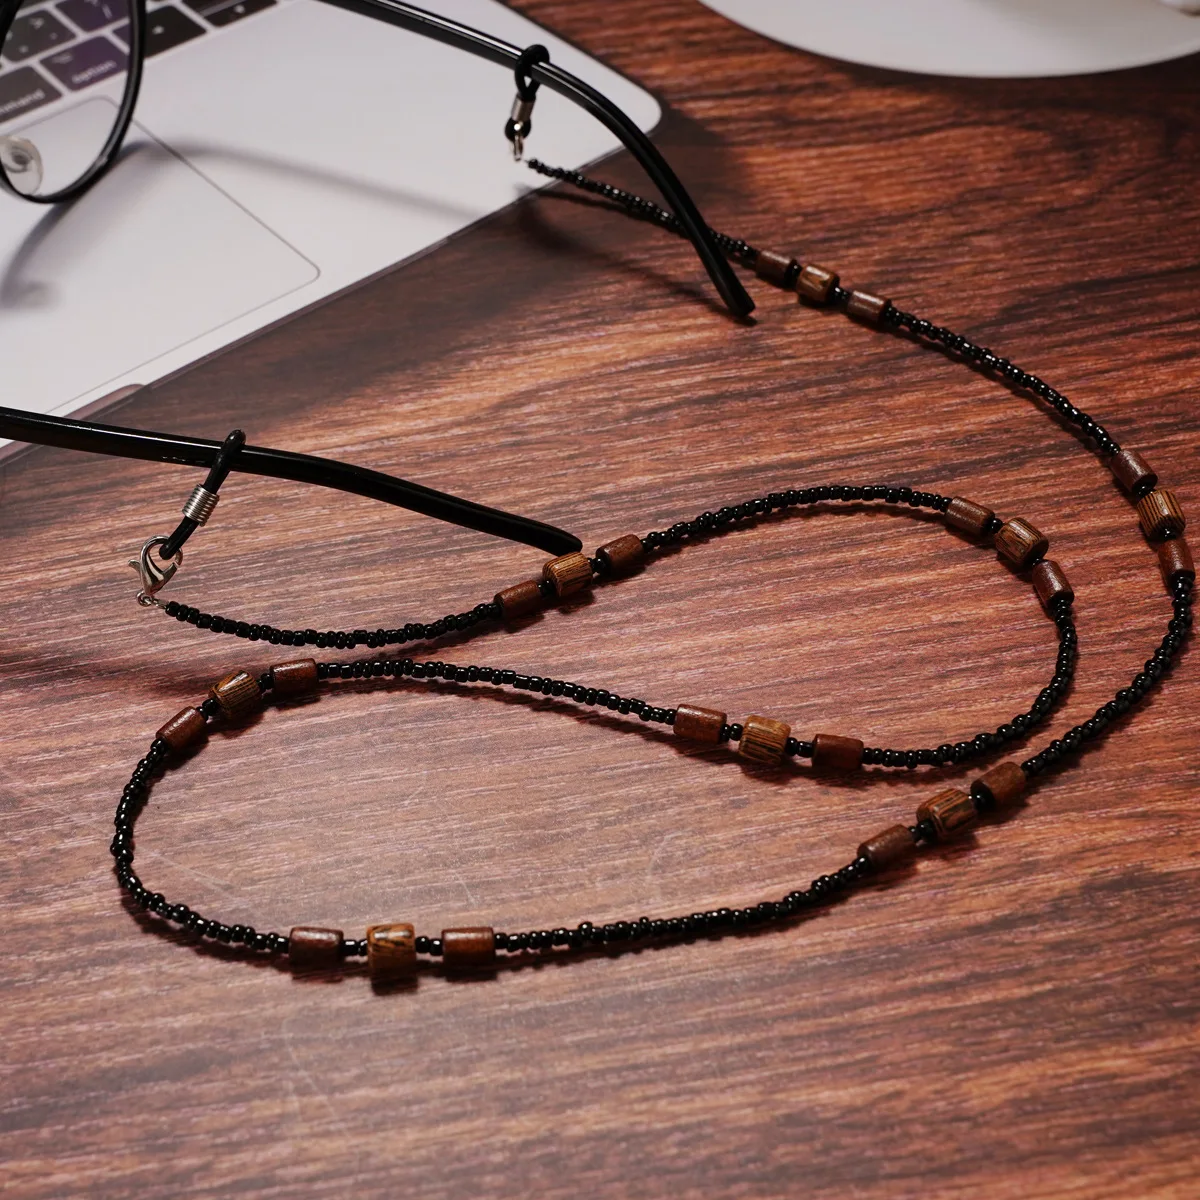 Chic Wooden Beads Beaded Glasses Chain No Fading Sunglasses Lanyard Eyeglass Cord Hanging Neck Strap